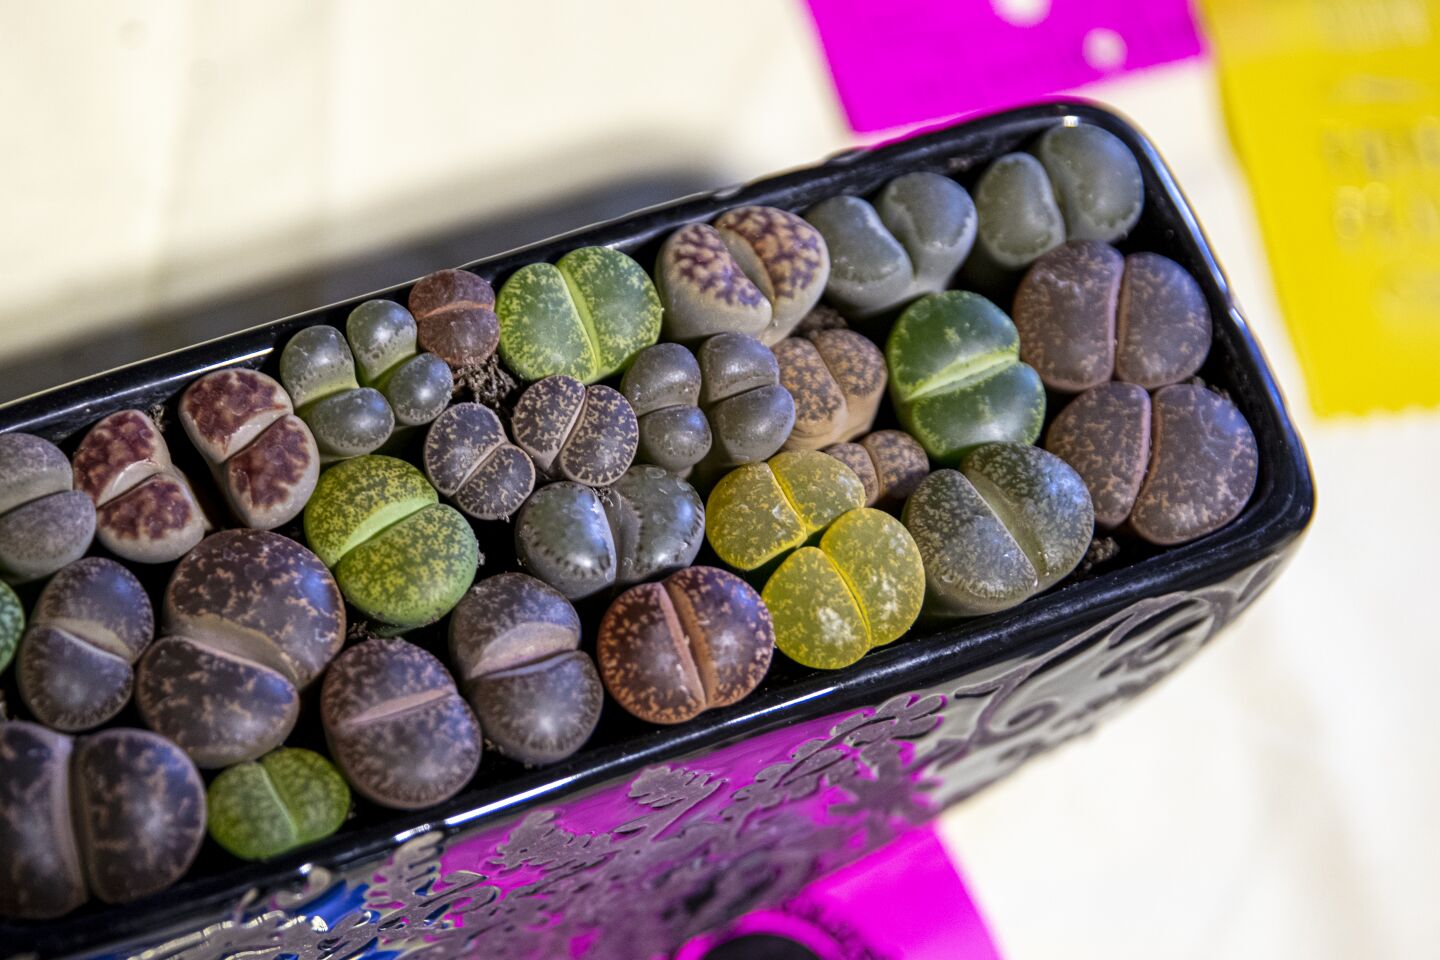 "Dulces!" squealed one visitor when she saw Tori Wilson's candy-like display of colorful Lithops, also known as living stones. Wilson, 35, of Arcadia, says the succulents are easy to kill by overwatering and they don't like to touch ceramics, so while she crammed more than 20 of them into this lovely pot for the exhibition, she immediately took them out again once they got home.